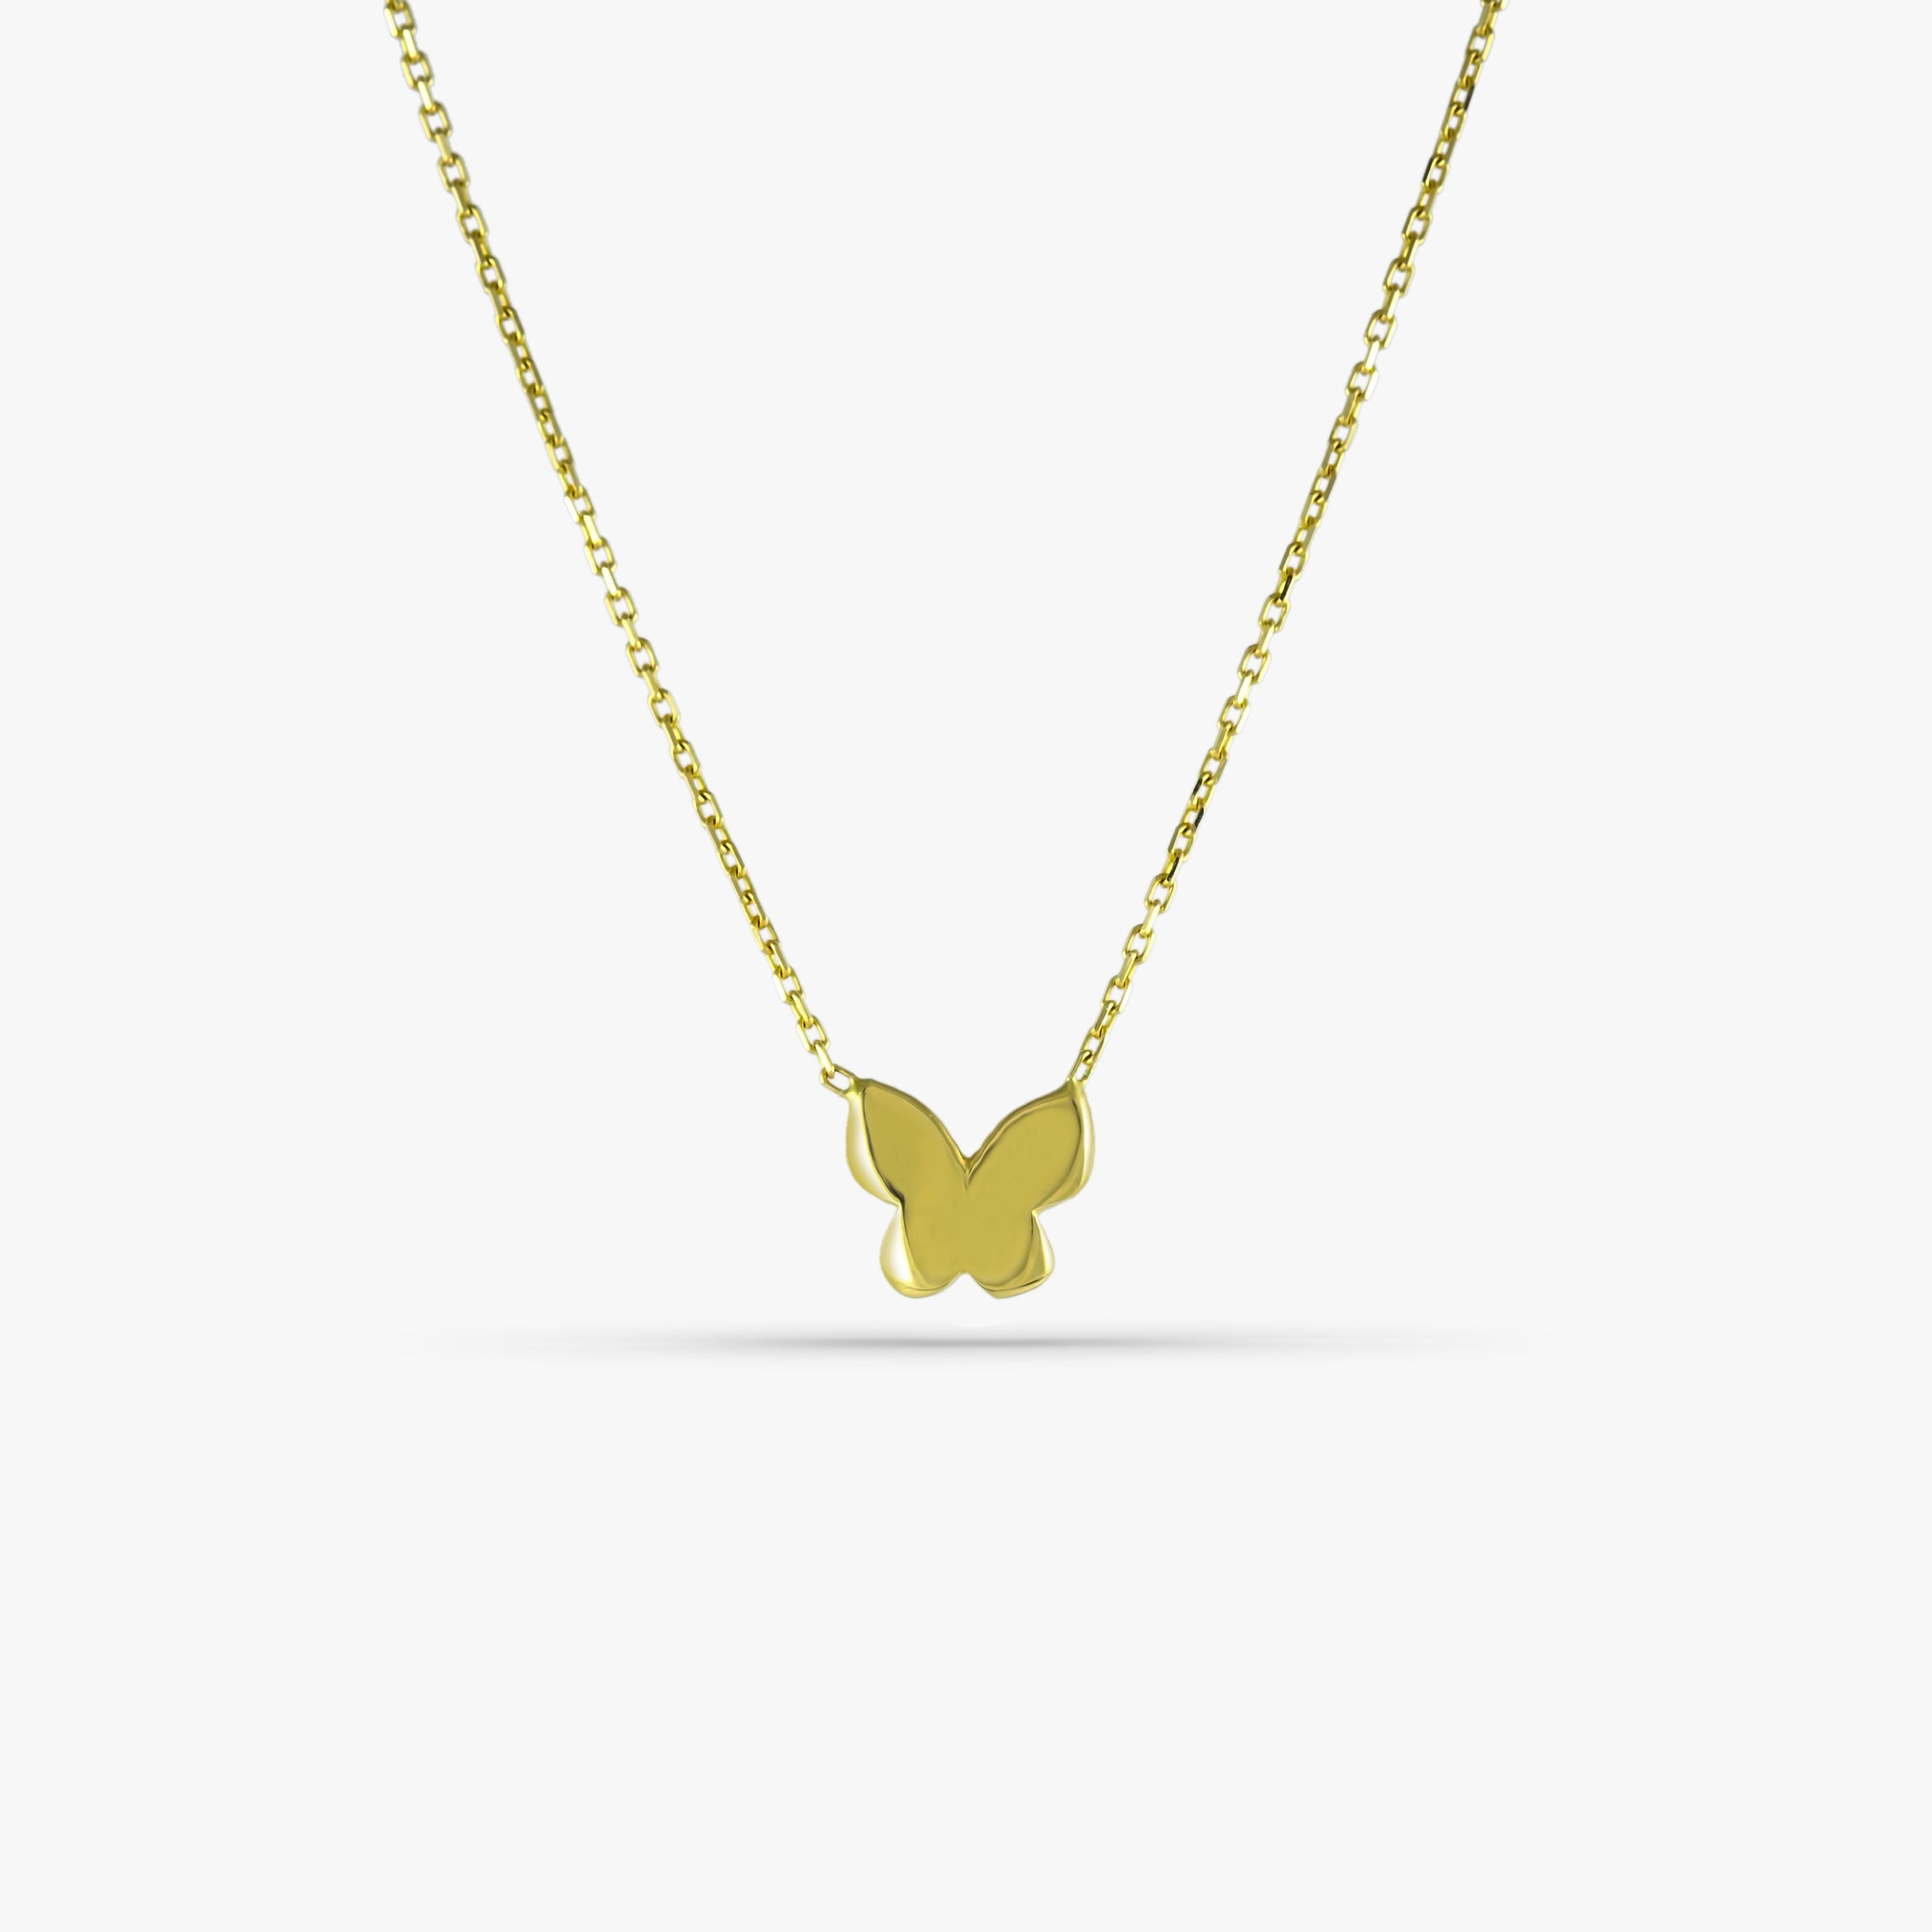 14k Gold Butterfly Necklace/Dainty Tiny Butterfly Necklace in 14K Solid Gold